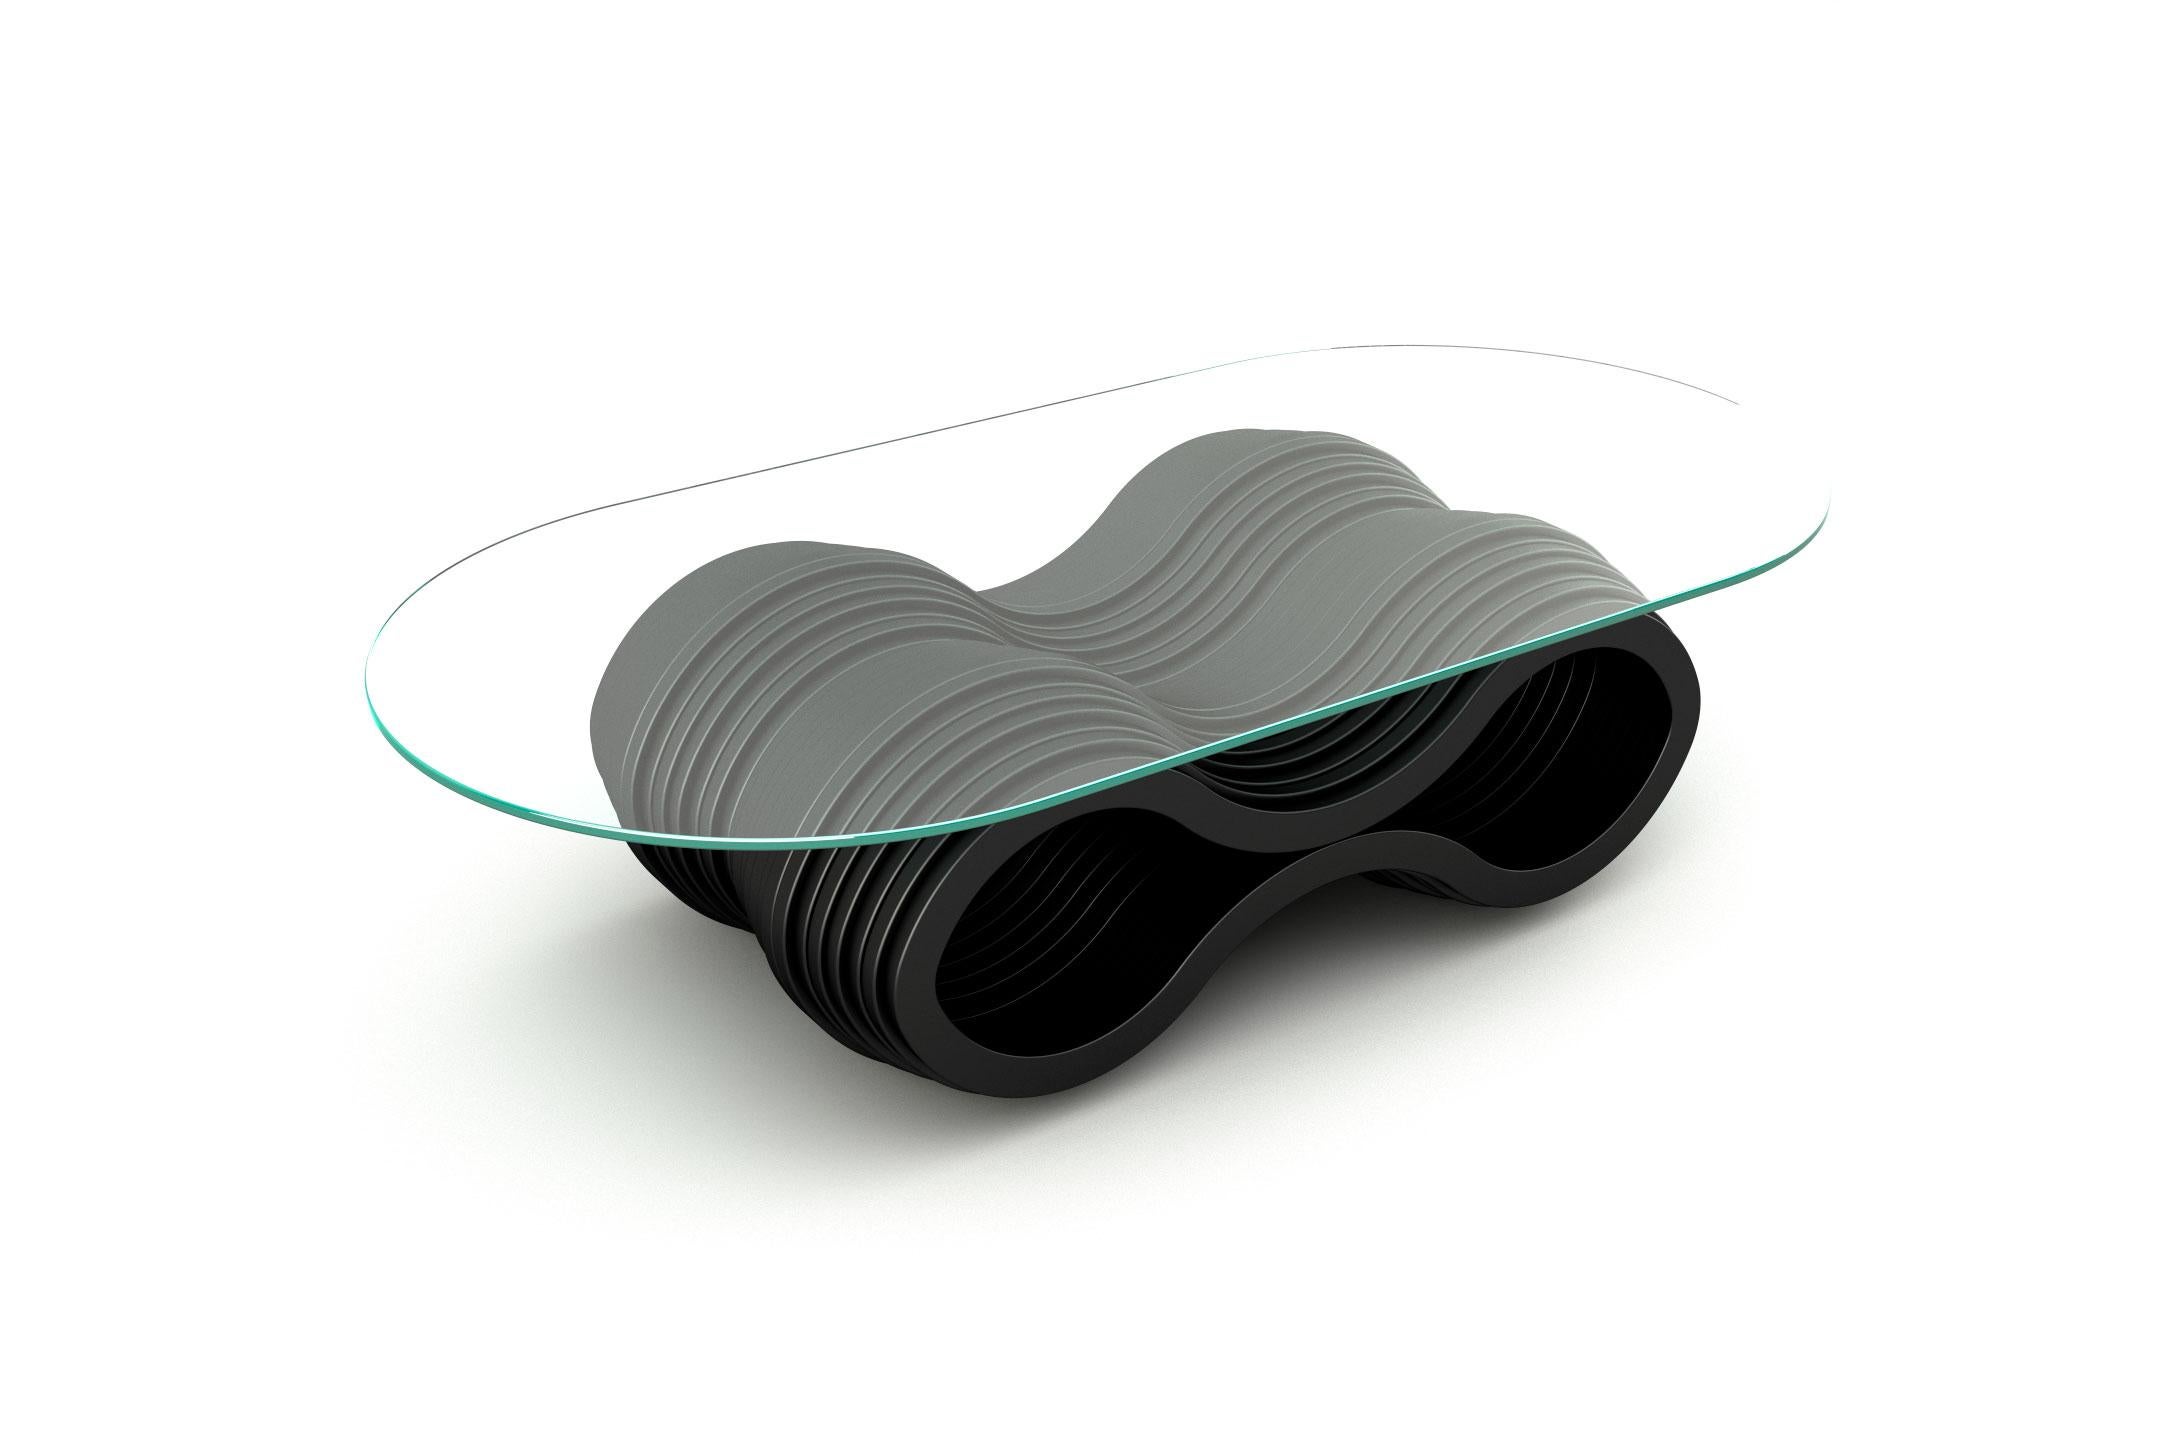 Coffee table manufactured from resilient layers of lacquered wood which evoque the curvaceous beauty of the sandy dunes. Its structure is shaped from lacquered and cut layers of wood with a round toughened clear glass top which can be customized to